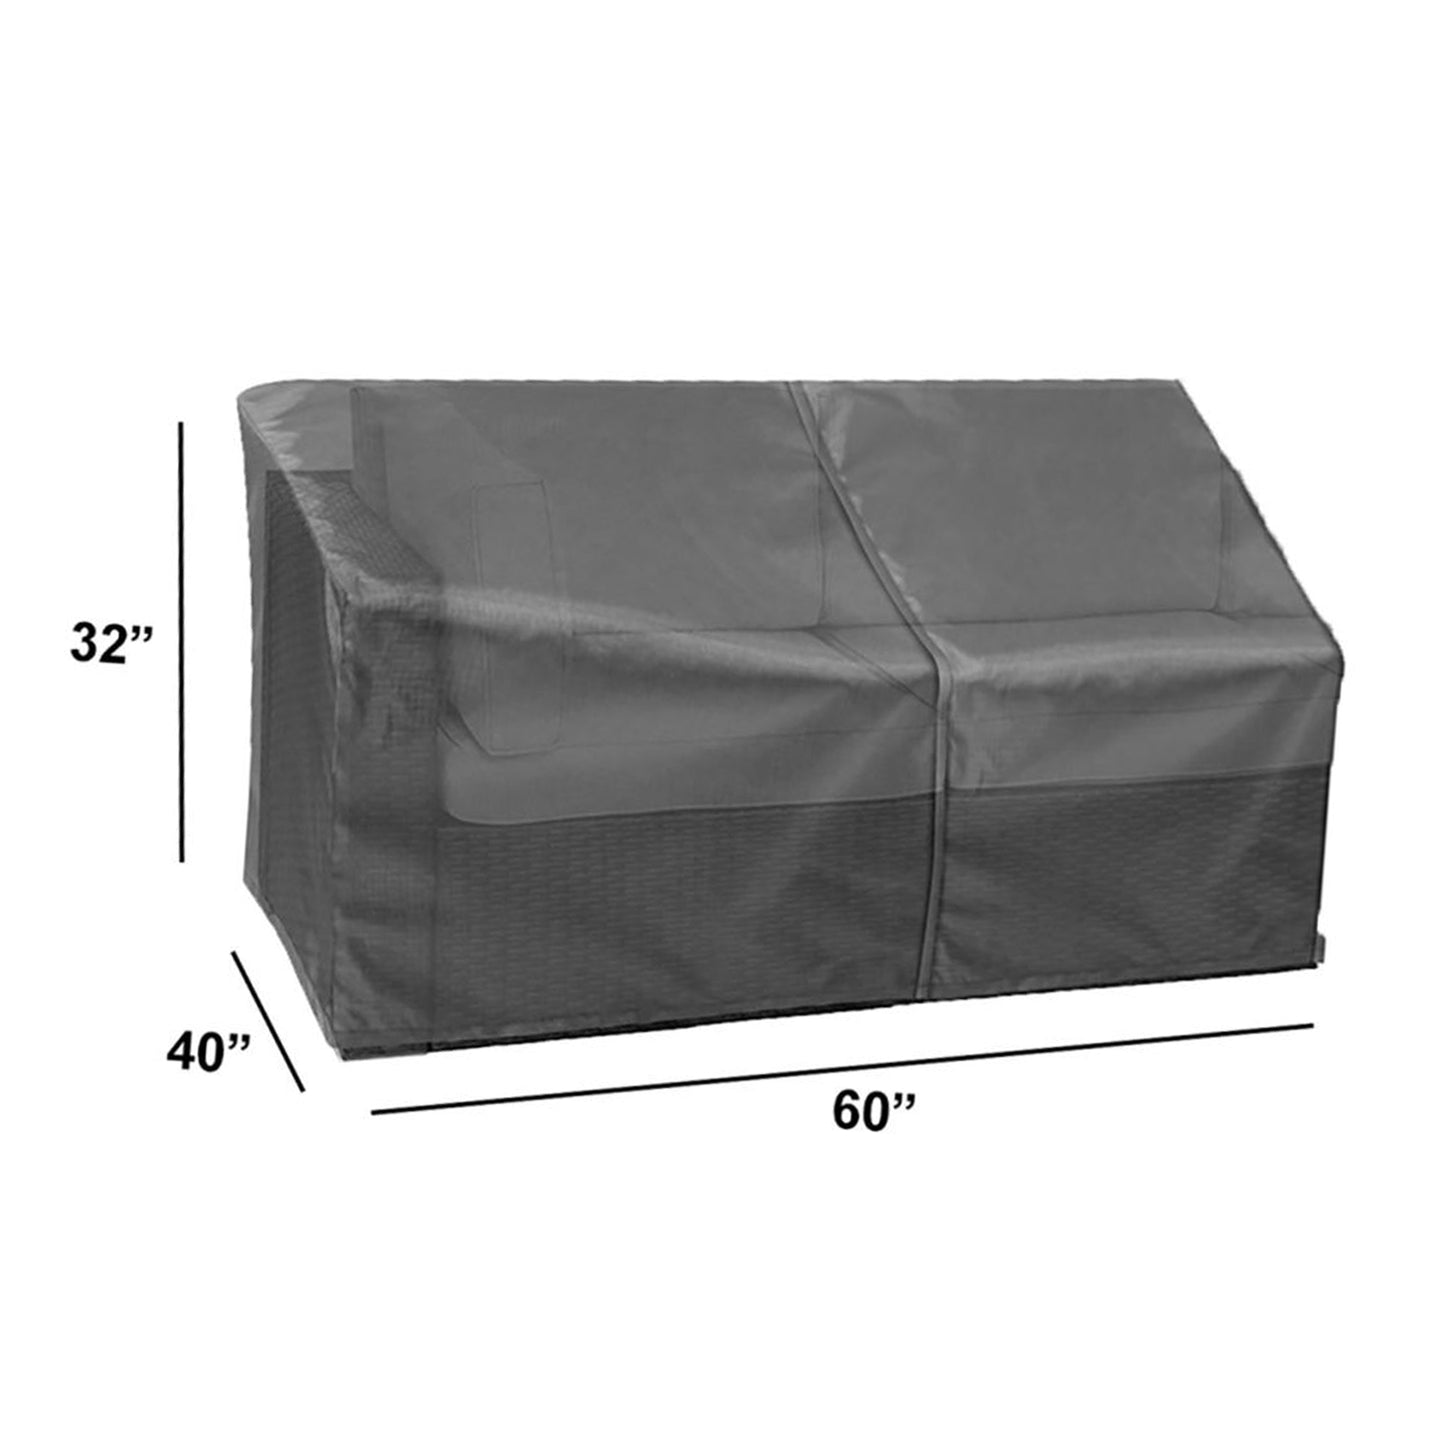 Modular Cover Loveseat Right End - 60"Wx40"Dx18"H
- Mercury